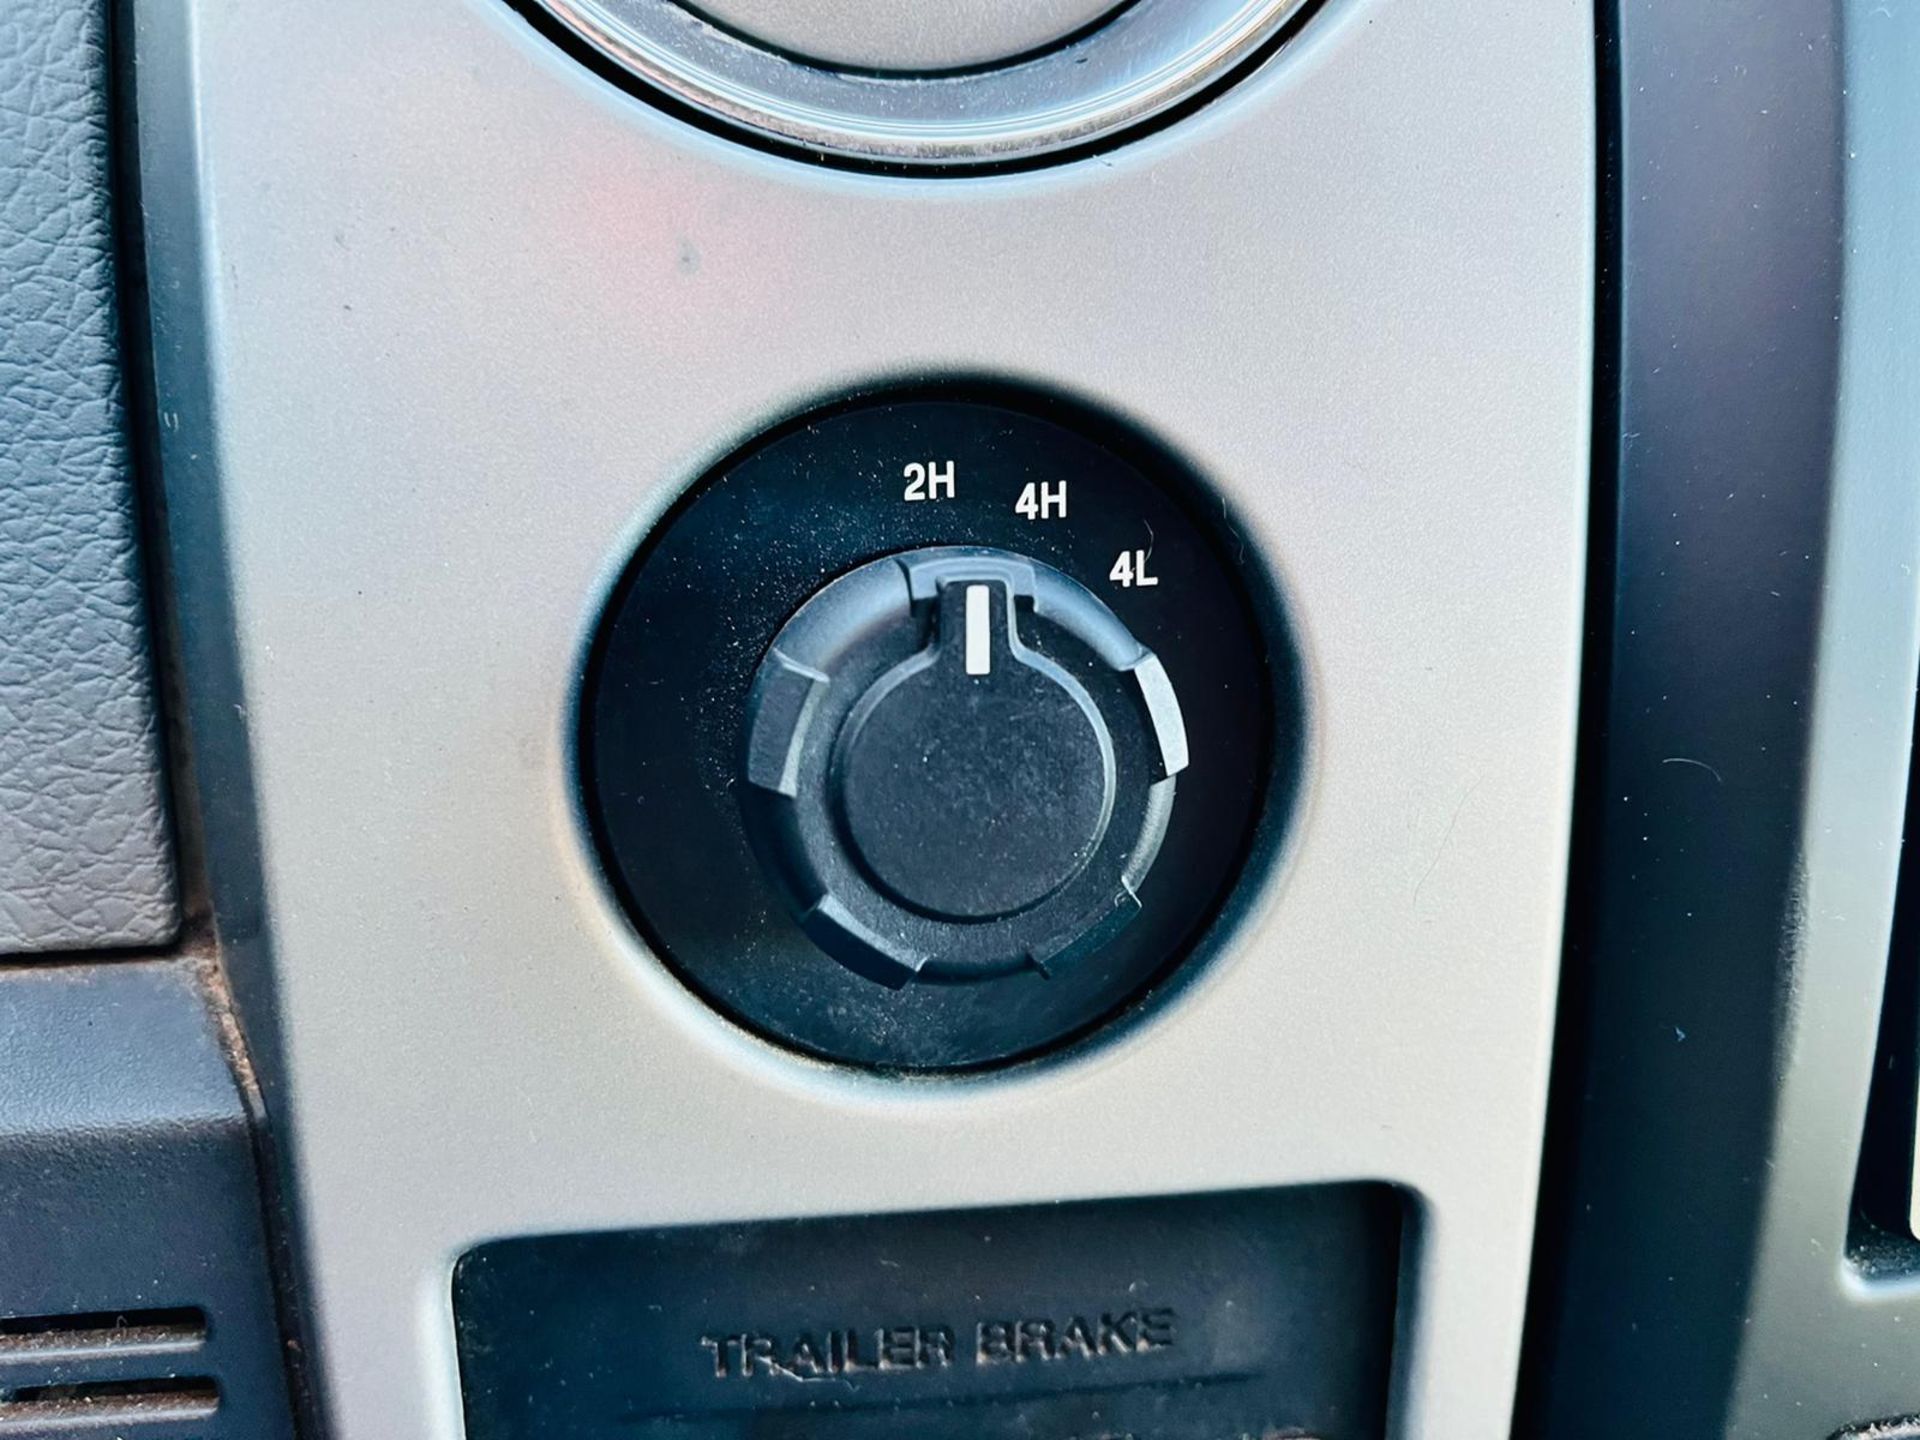 Ford F-150 5.0L V8 XLT Edition 4WD Super-Crew '2011 Year' A/C - Cruise Control - Chrome Pack - Image 22 of 29